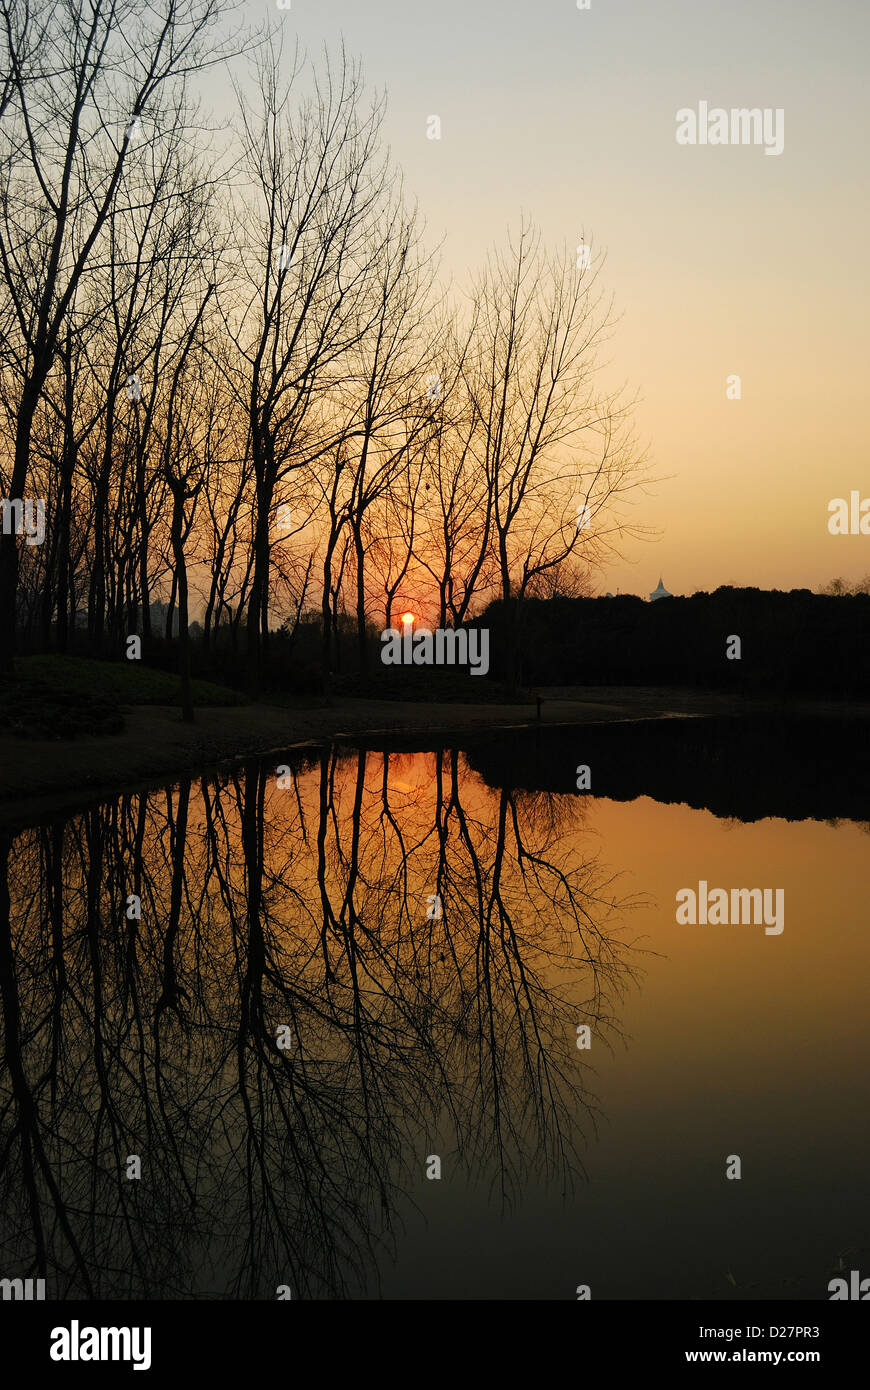 Beautiful tree silhouette of nature forest during sunset by Pudong Century Park, Shanghai, China. Stock Photo